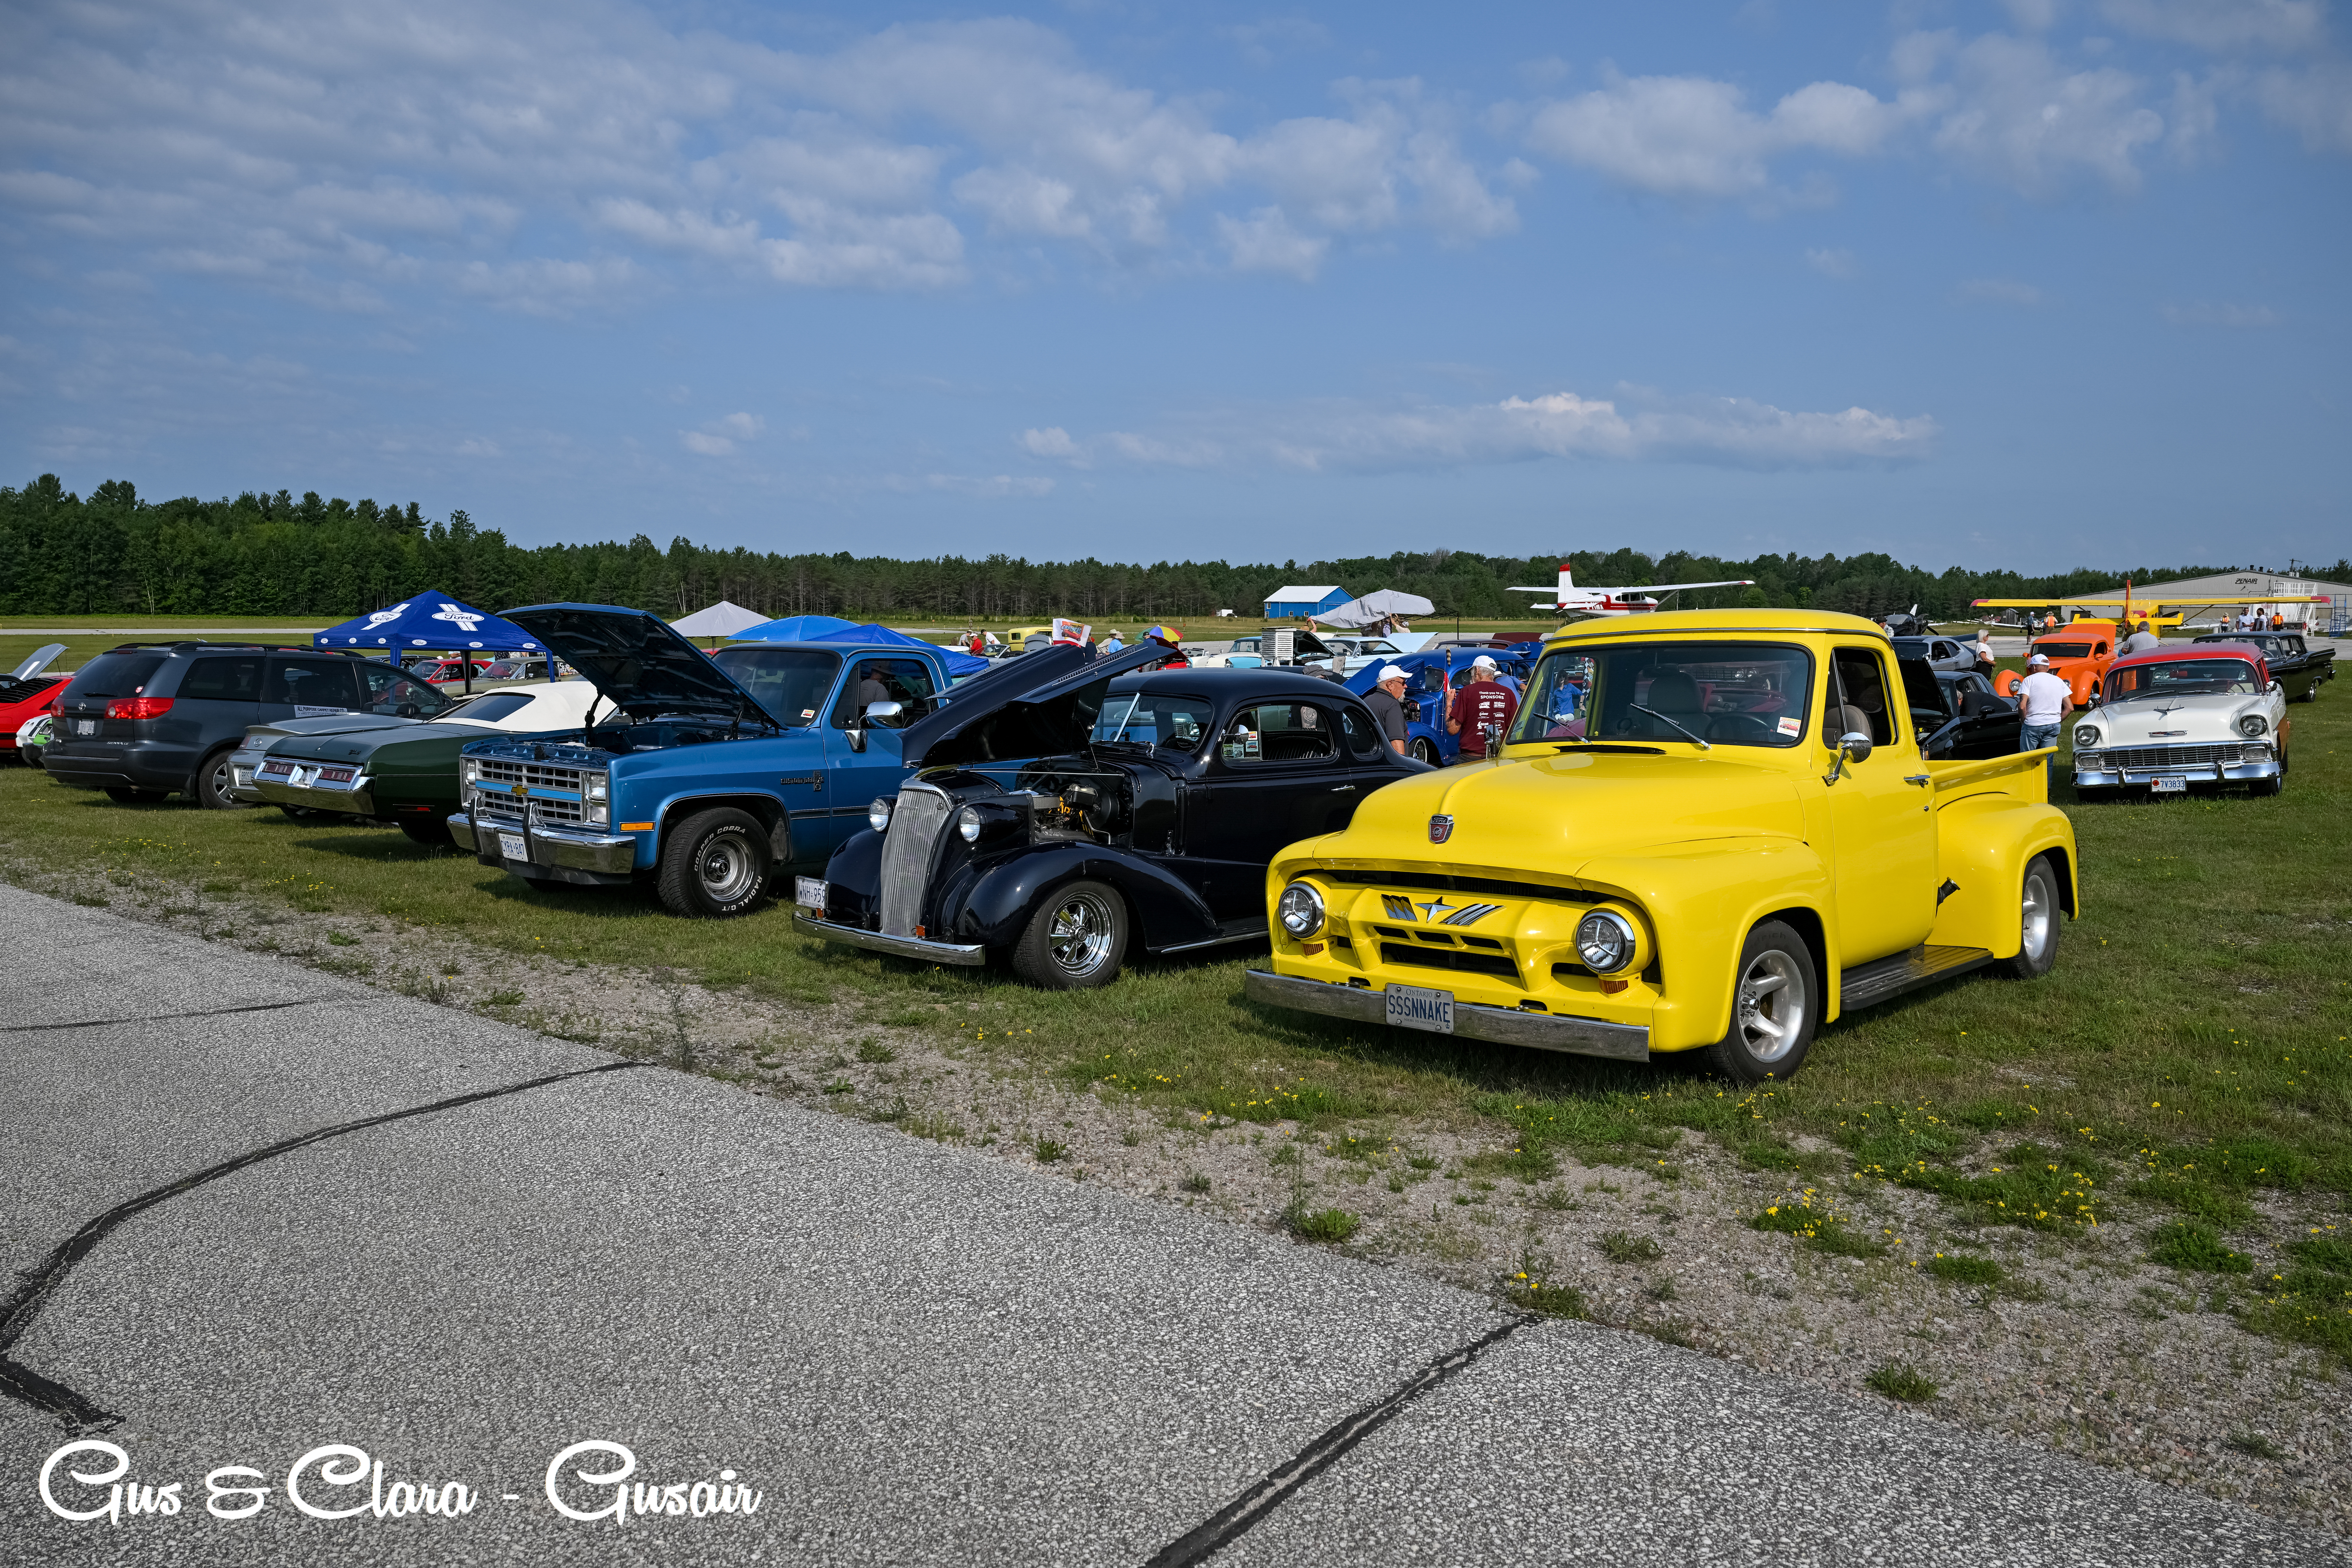 Cool vintage cars attended the drive in. Image courtesy of Gus and Clara Corujo of Gusair Photography